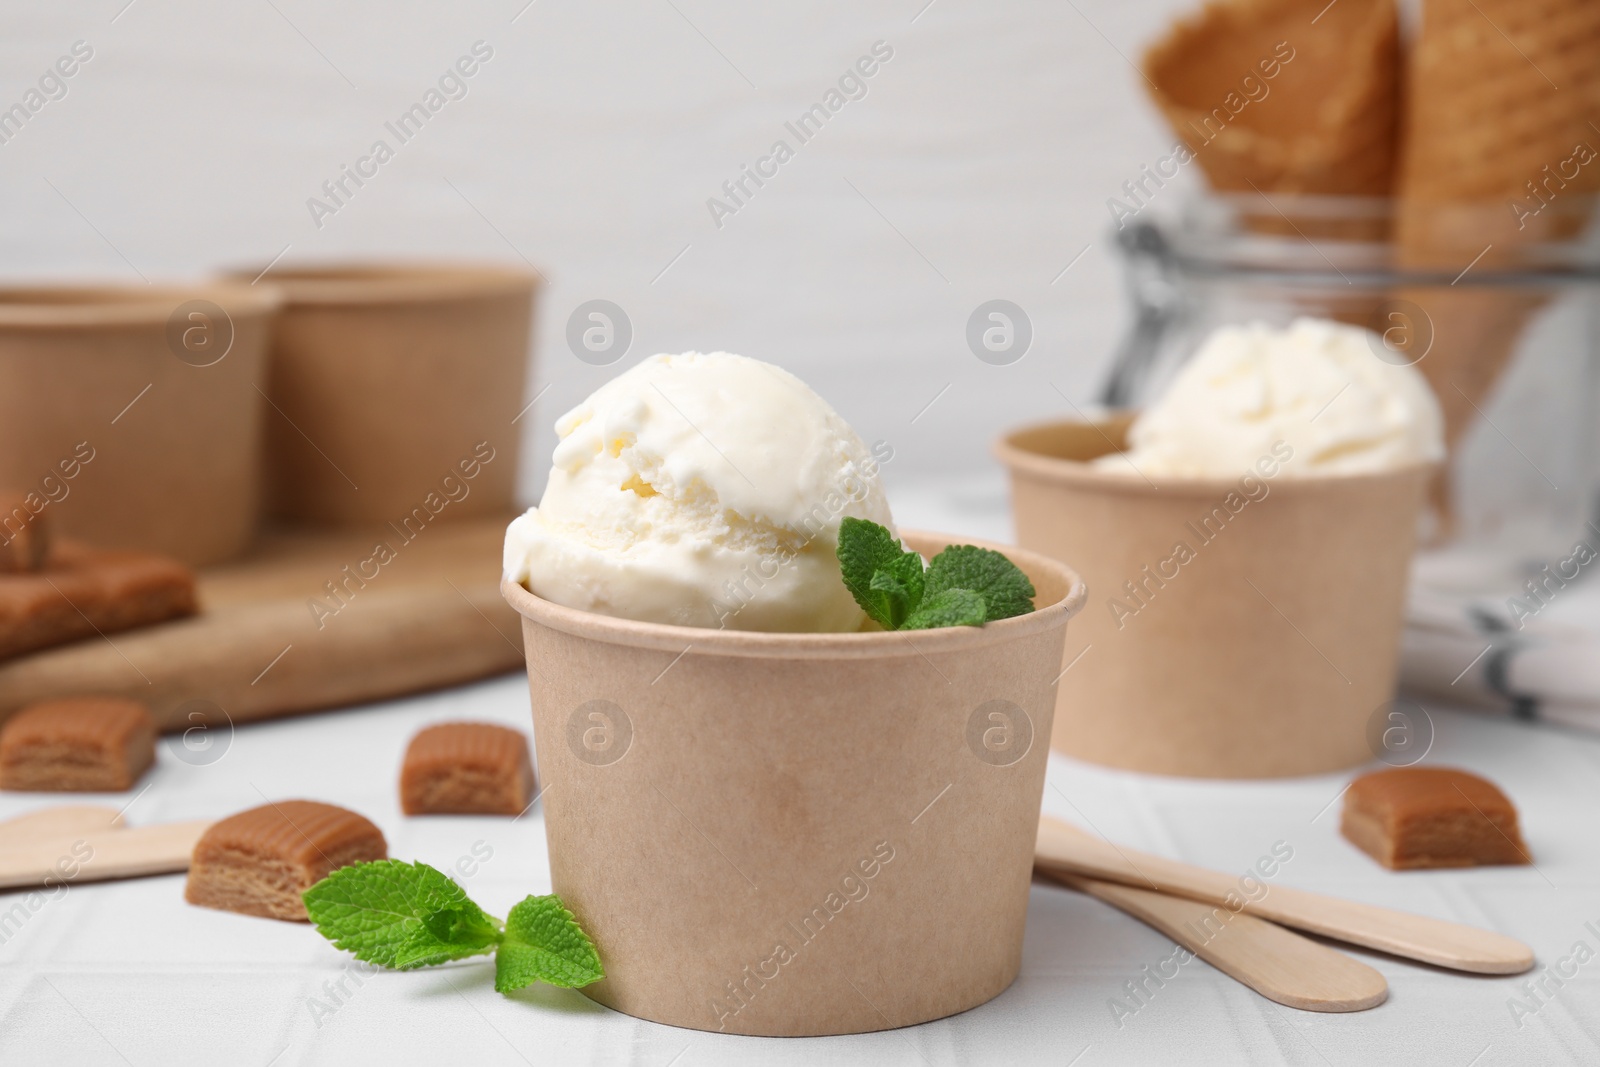 Photo of Scoops of ice cream with caramel sauce, mint leaves and candies on white tiled table, closeup